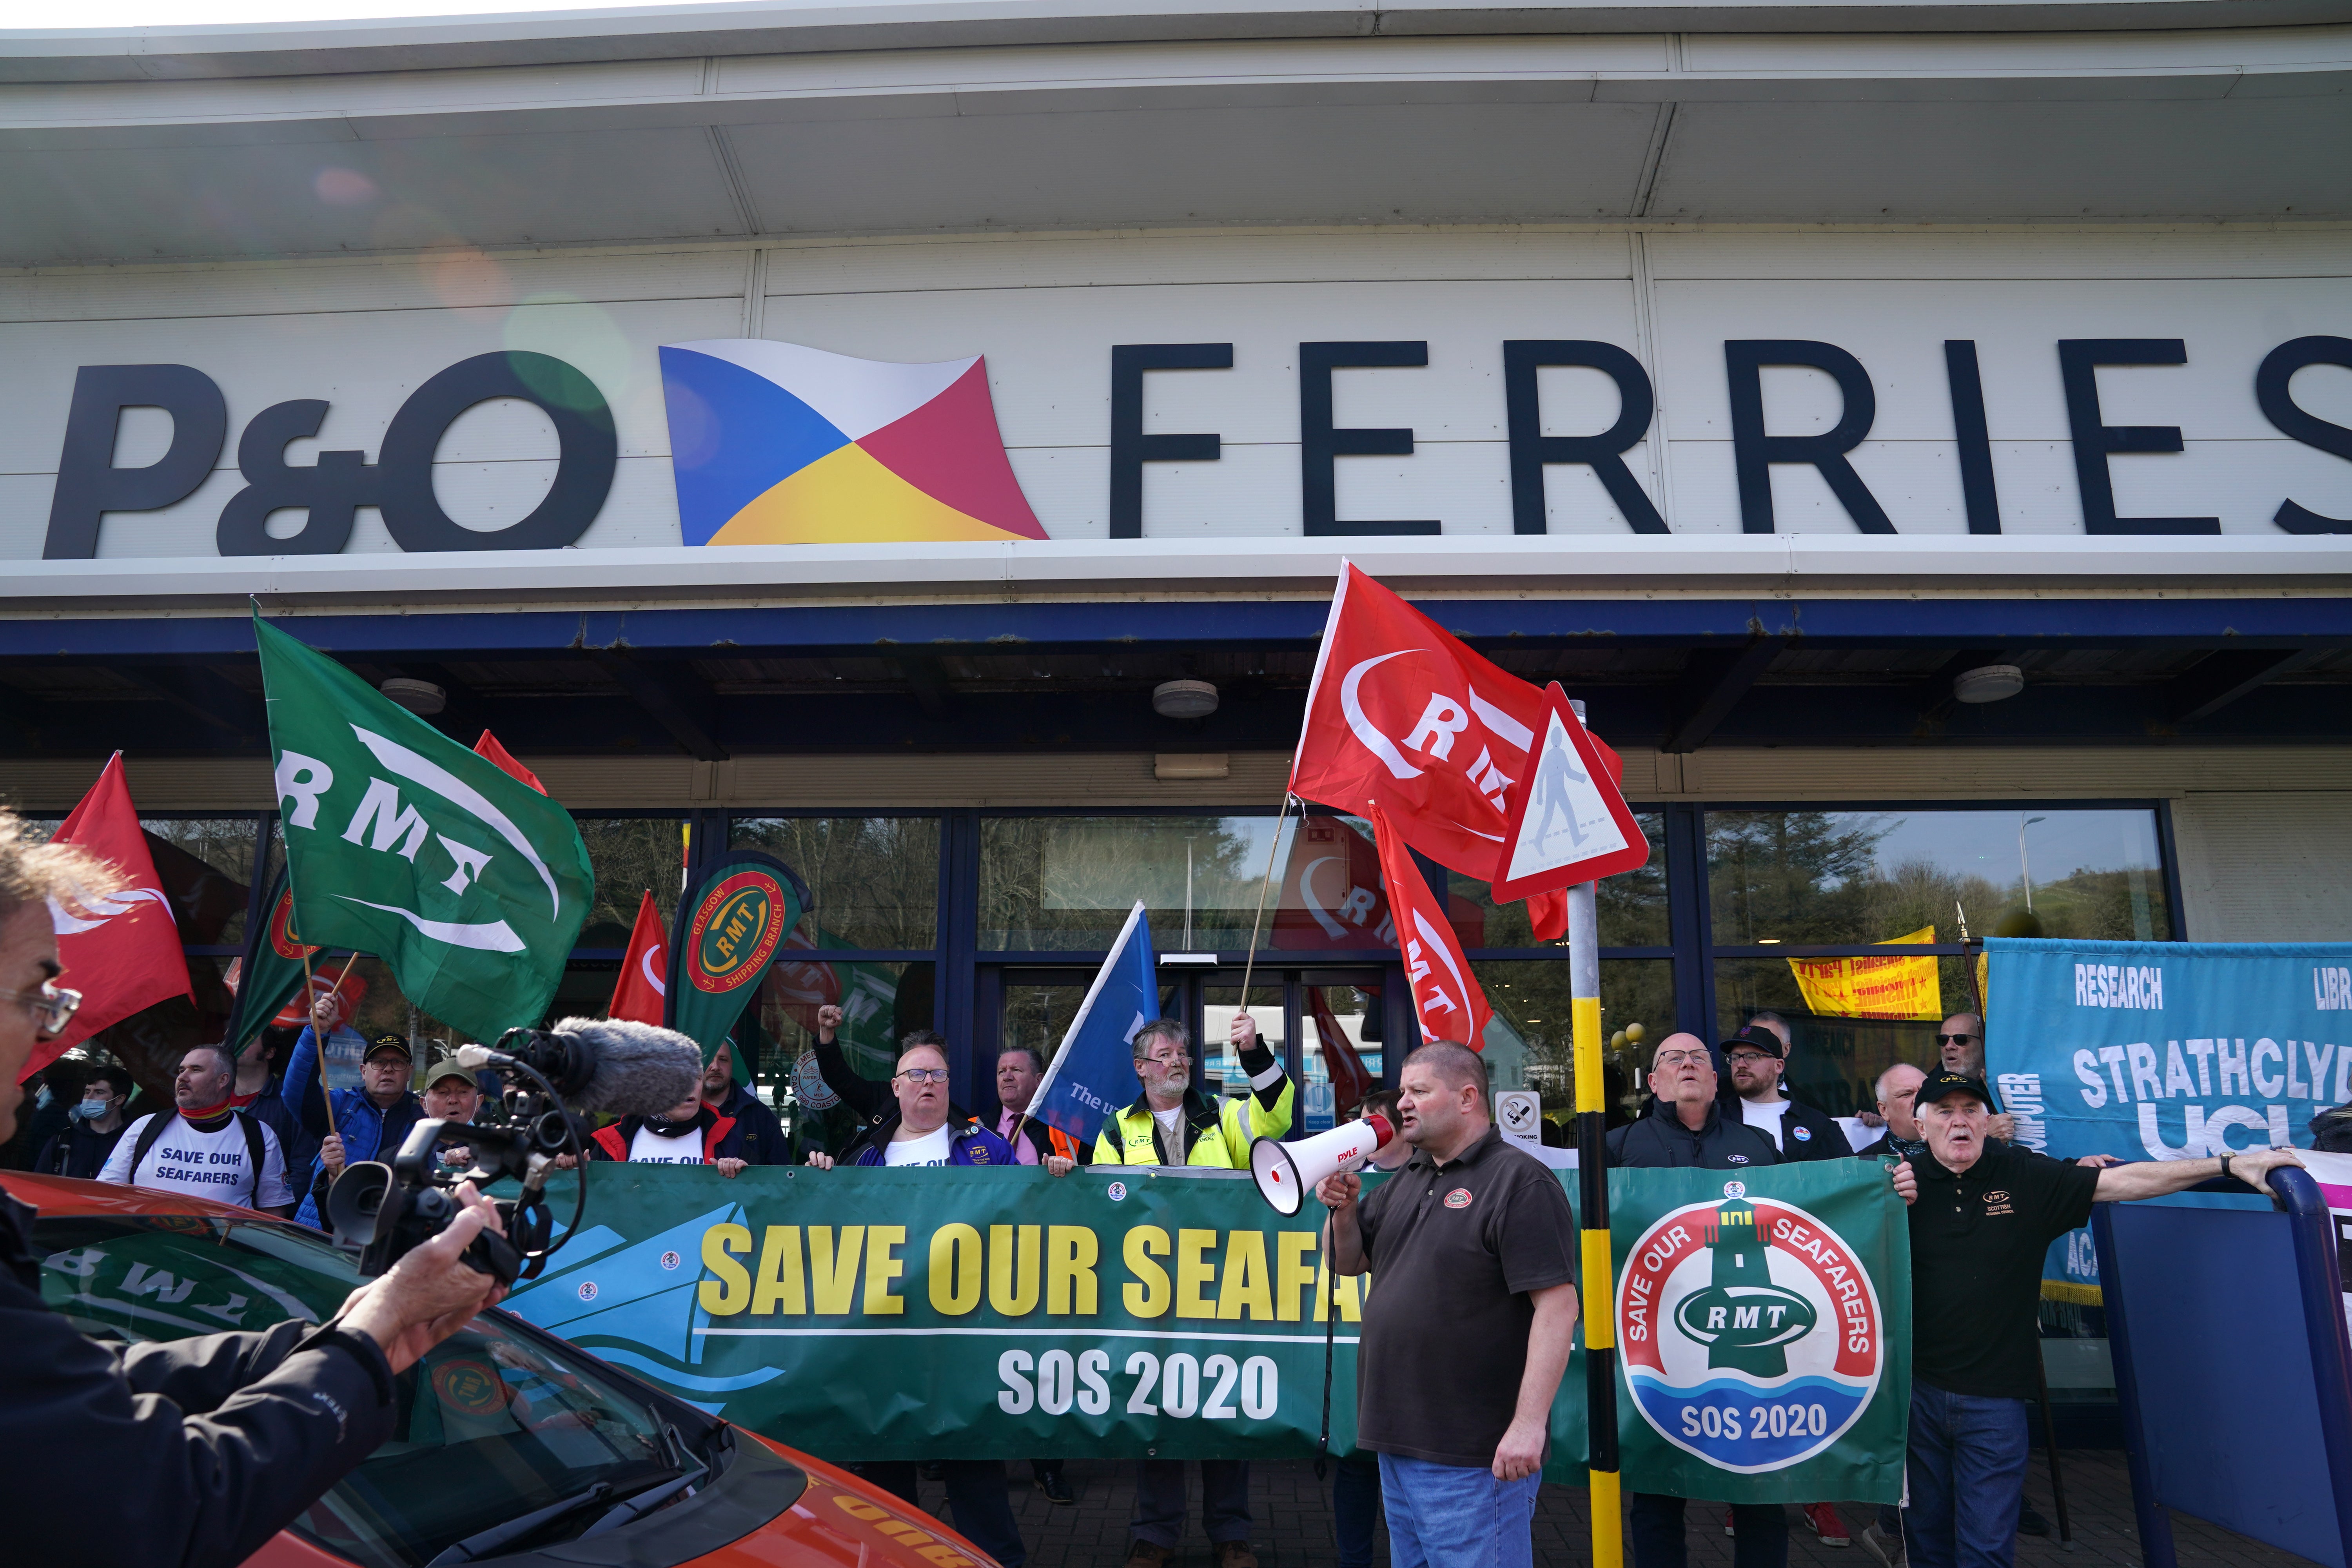 A demonstration against the dismissal of P&O workers organised by the Rail, Maritime and Transport union at the P&O ferry terminal in Cairnryan, Dumfries and Galloway (Andrew Milligan/PA)